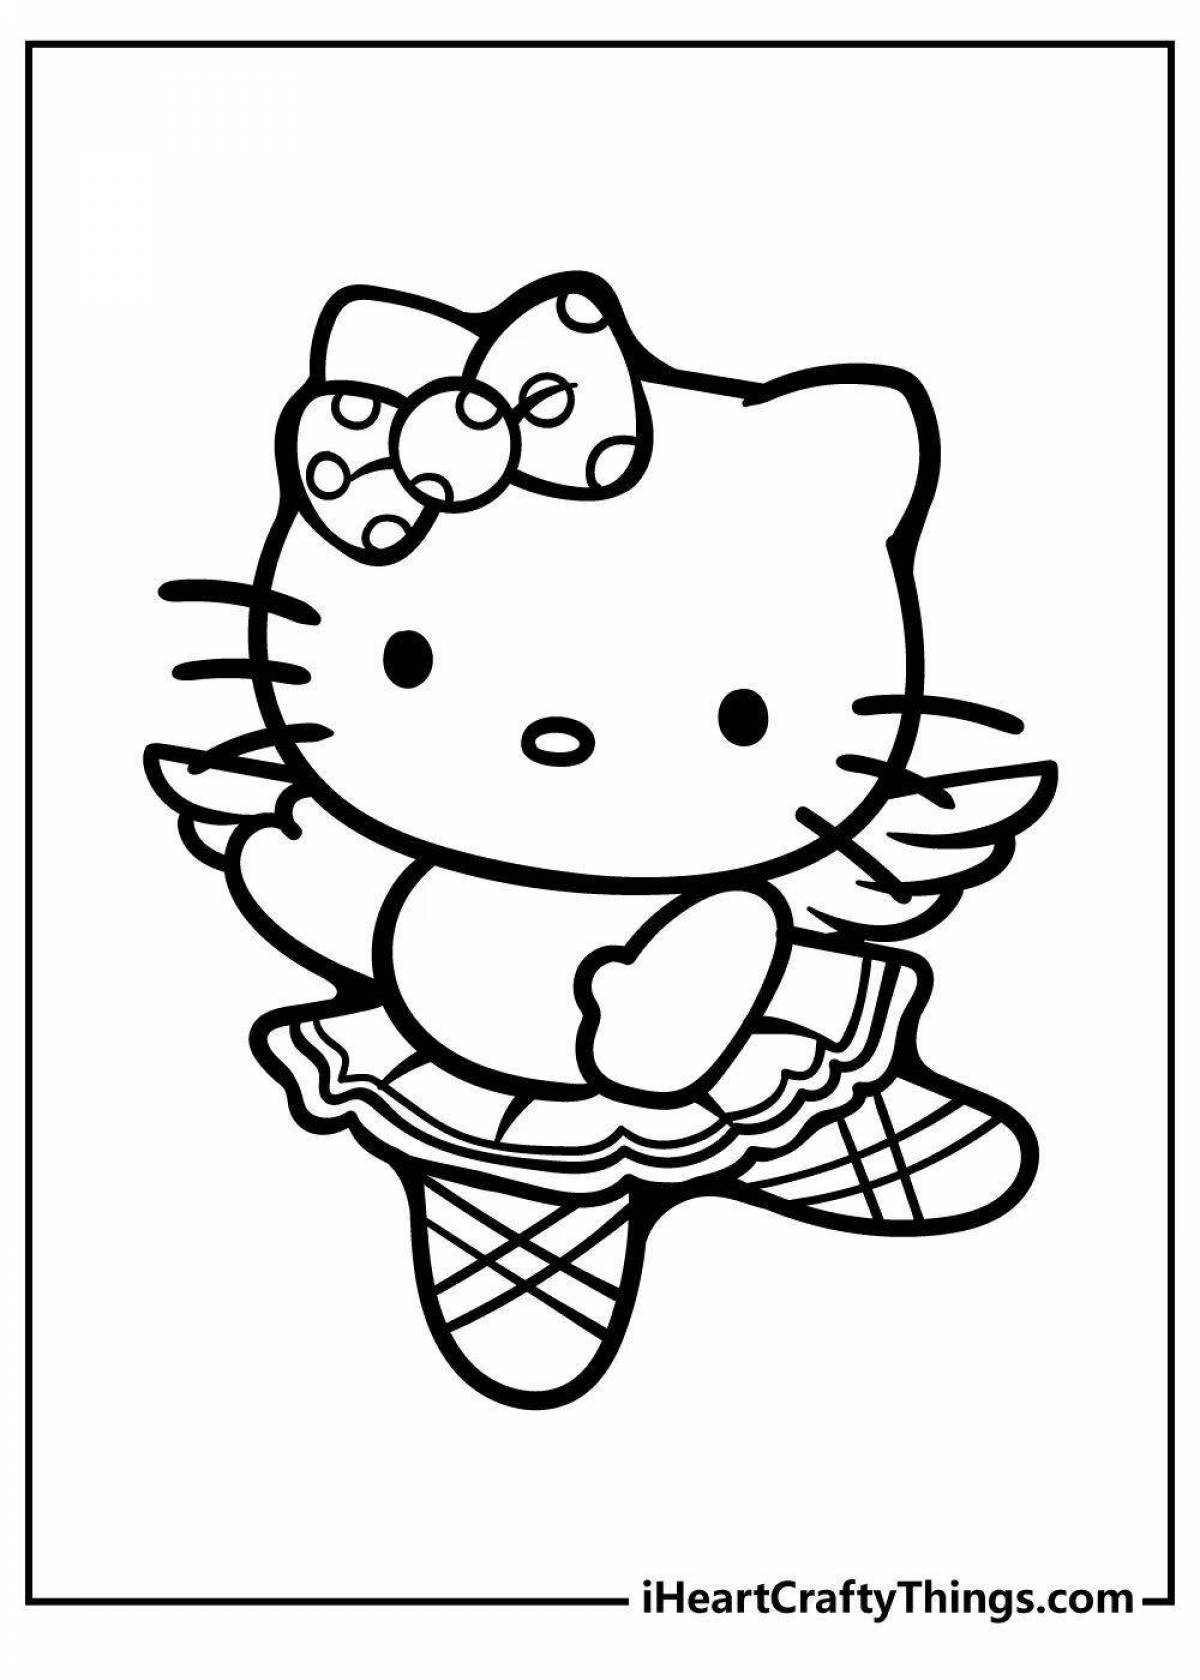 Exquisite hello kitty mermaid coloring book